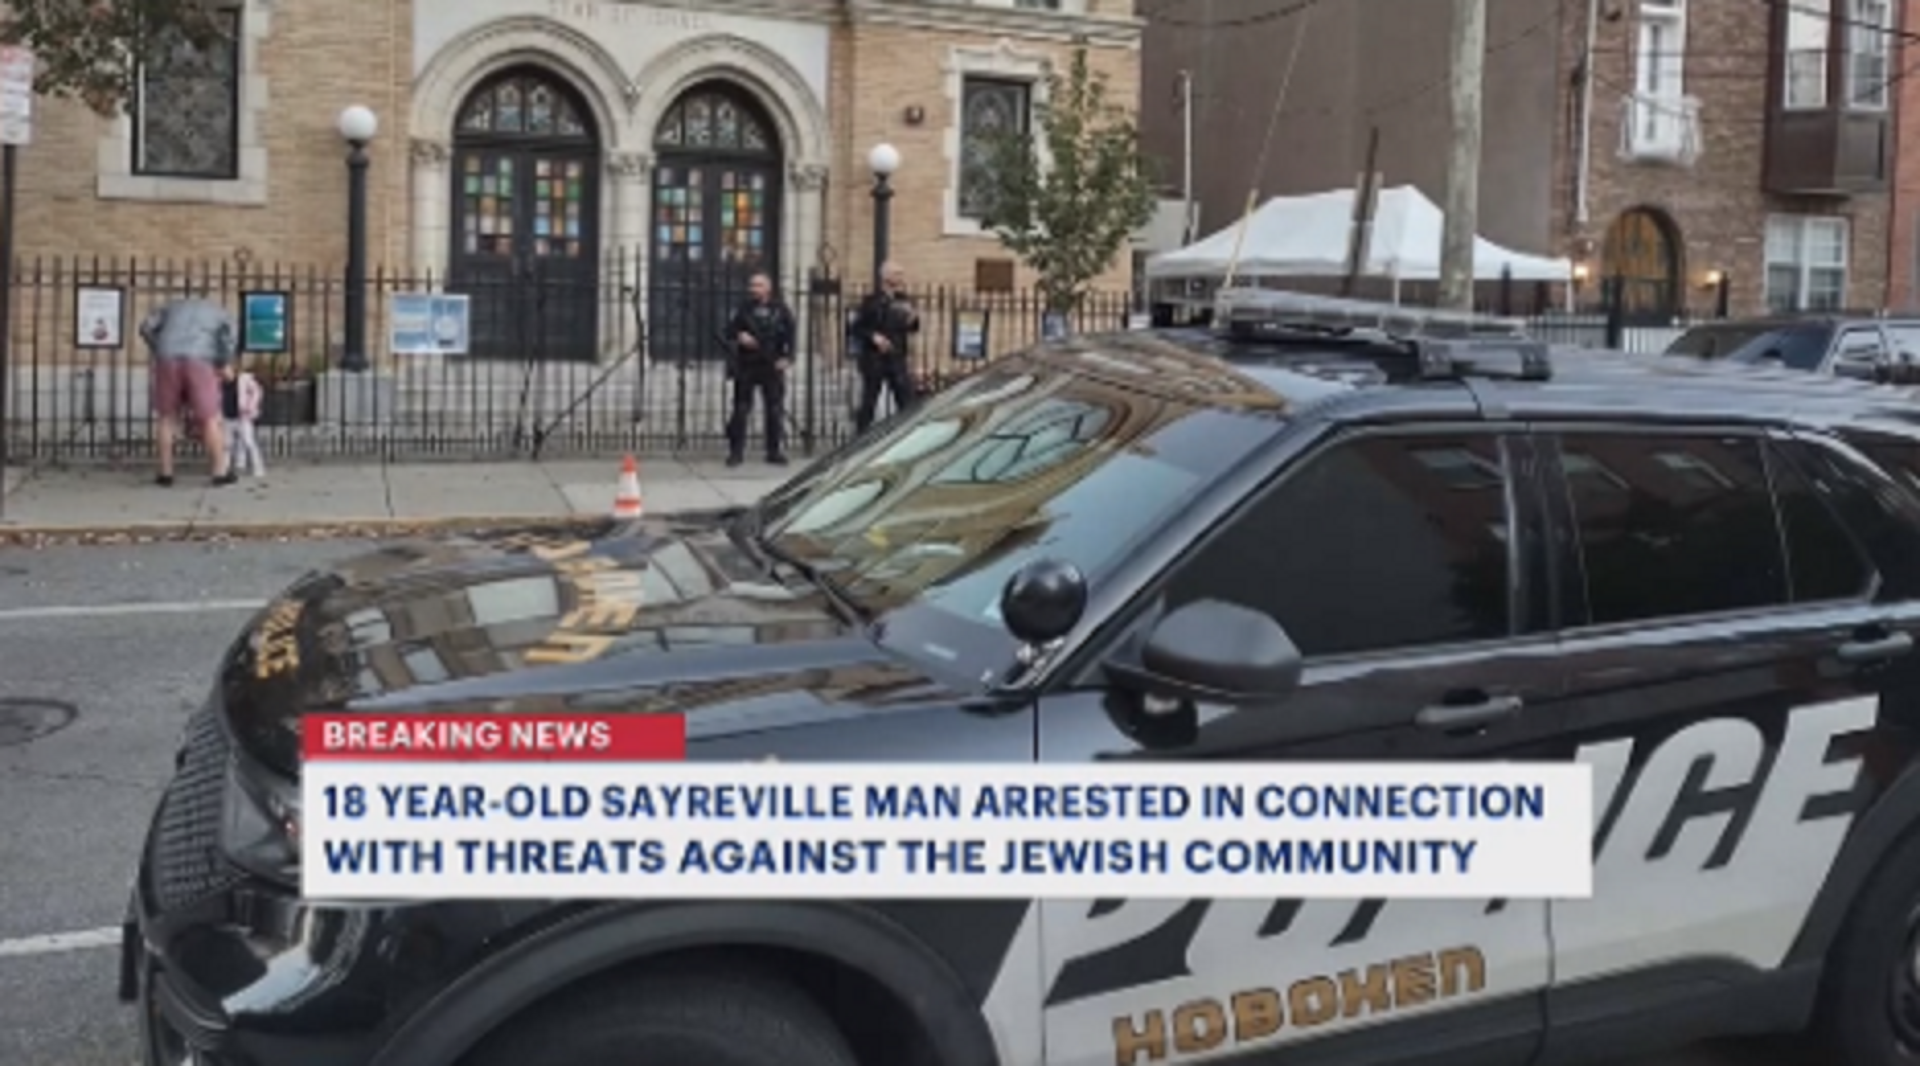 He was talking to bad people. Sayreville HS senior faces charges for threats made against synagogues